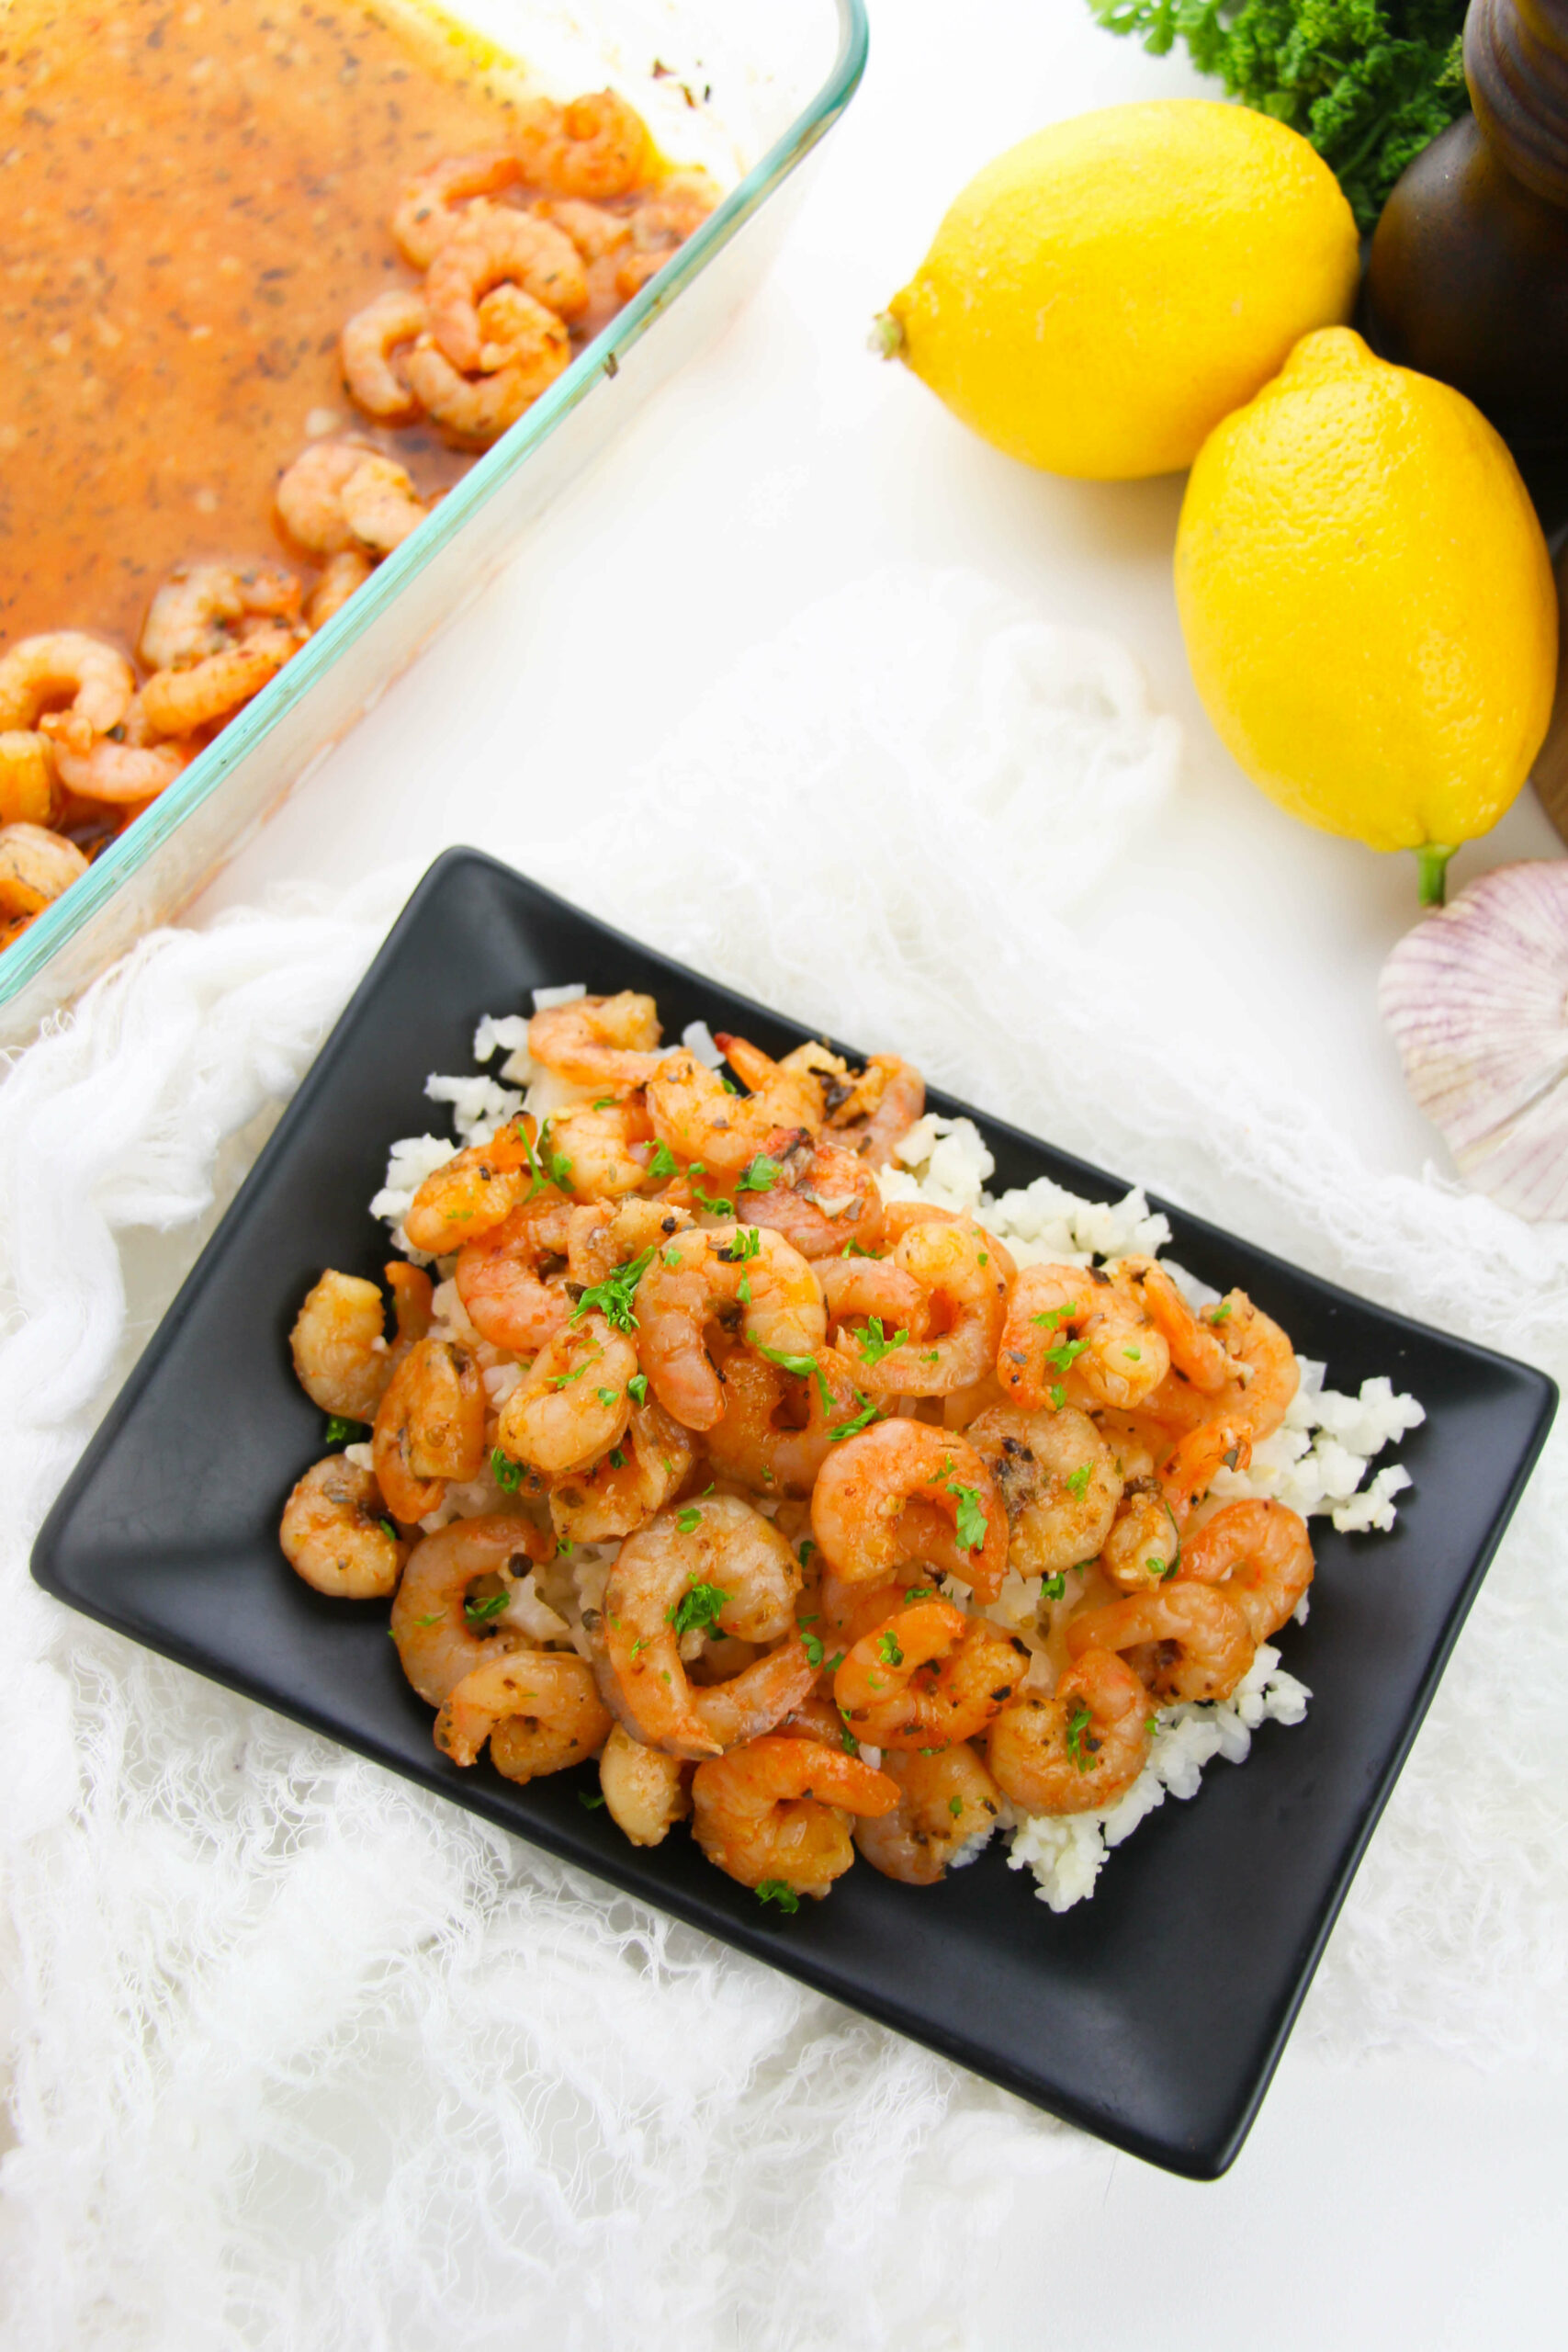 A top view of the shrimp, and some lemons.